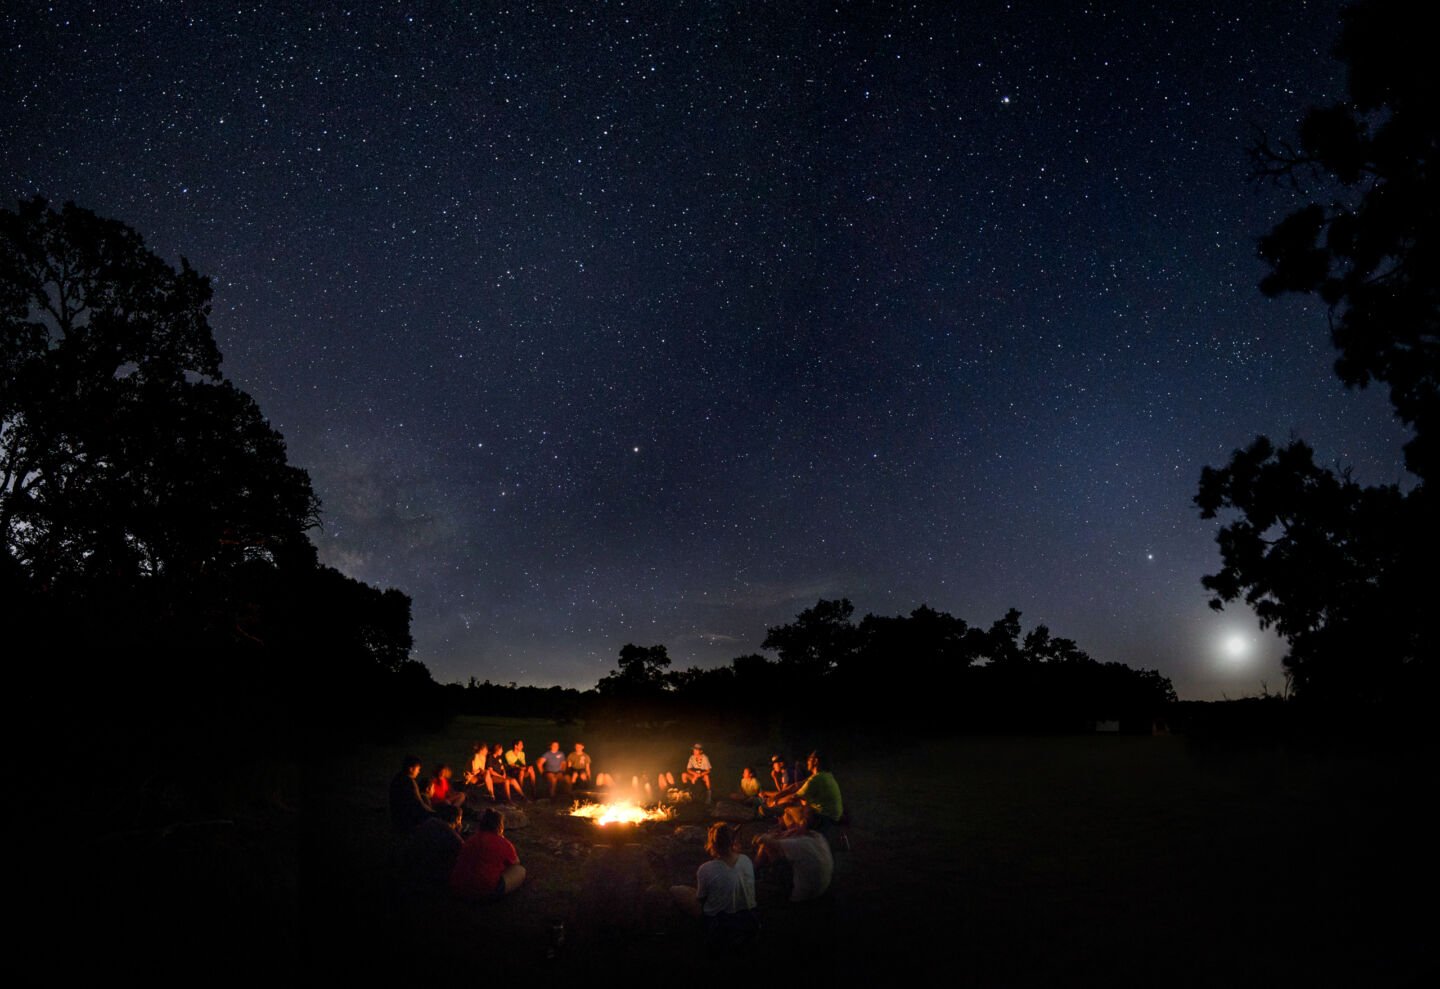 A group of people sit around a campfire under a starry Texas sky.